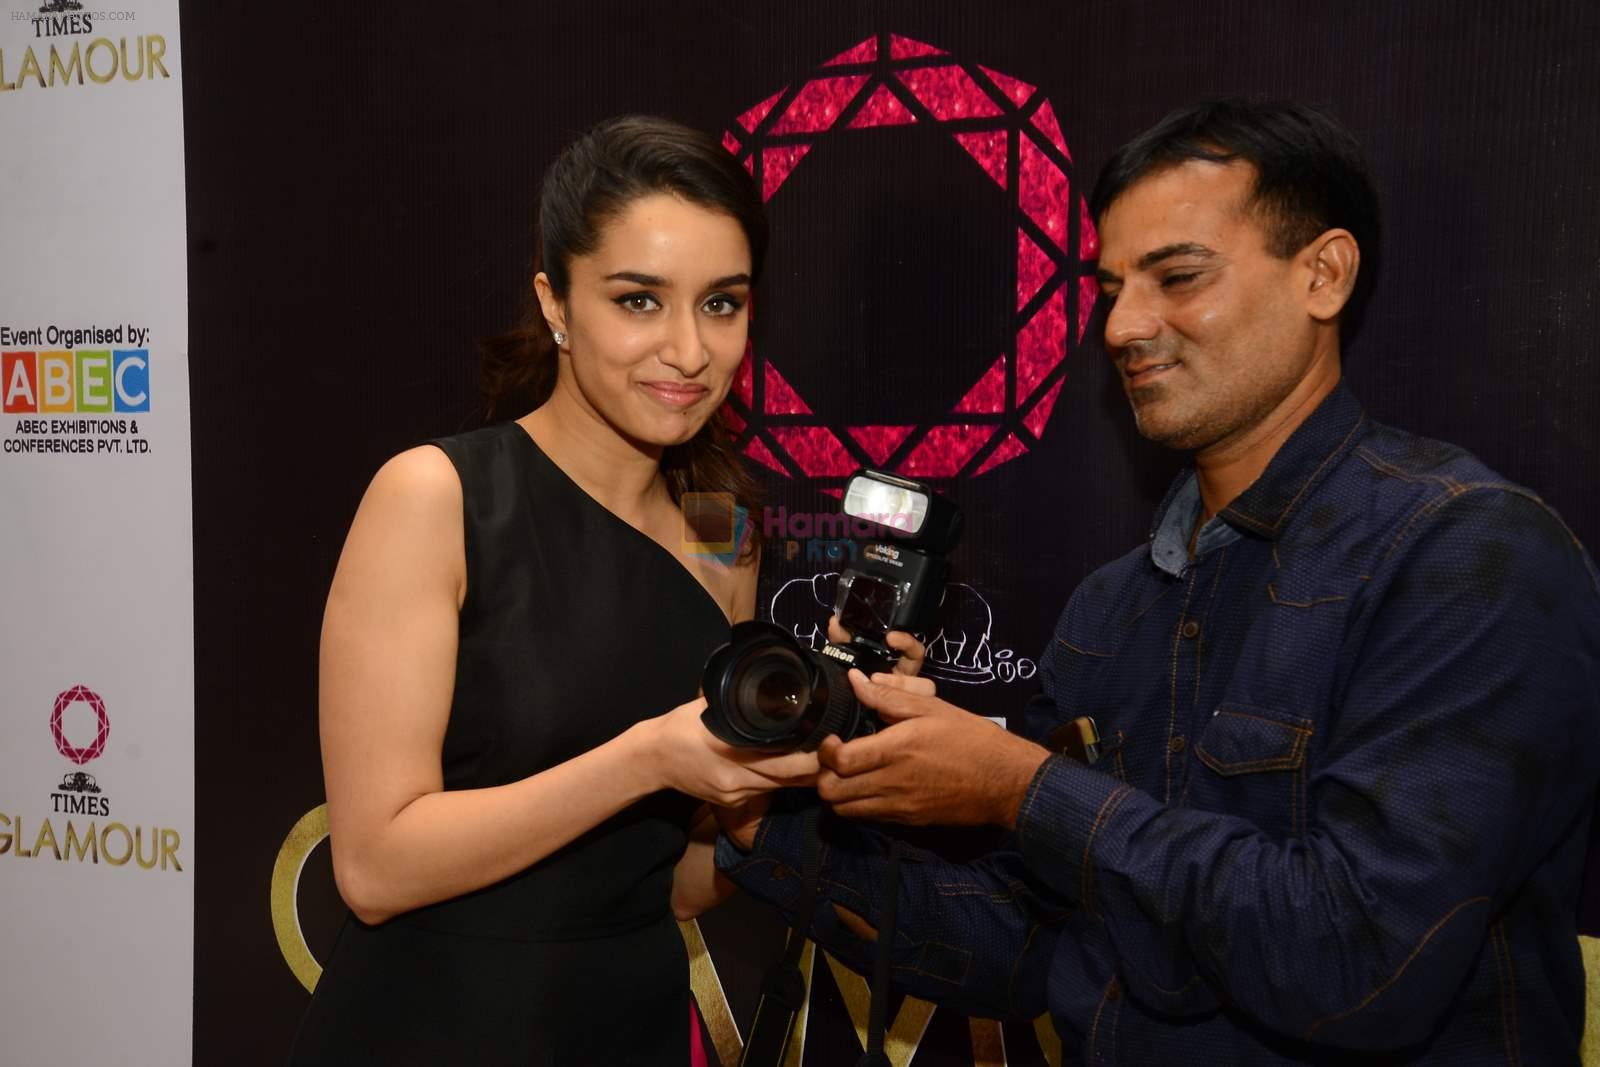 Shraddha Kapoor in Osman at Times Glamour event in Sahara Star on 10th July 2015